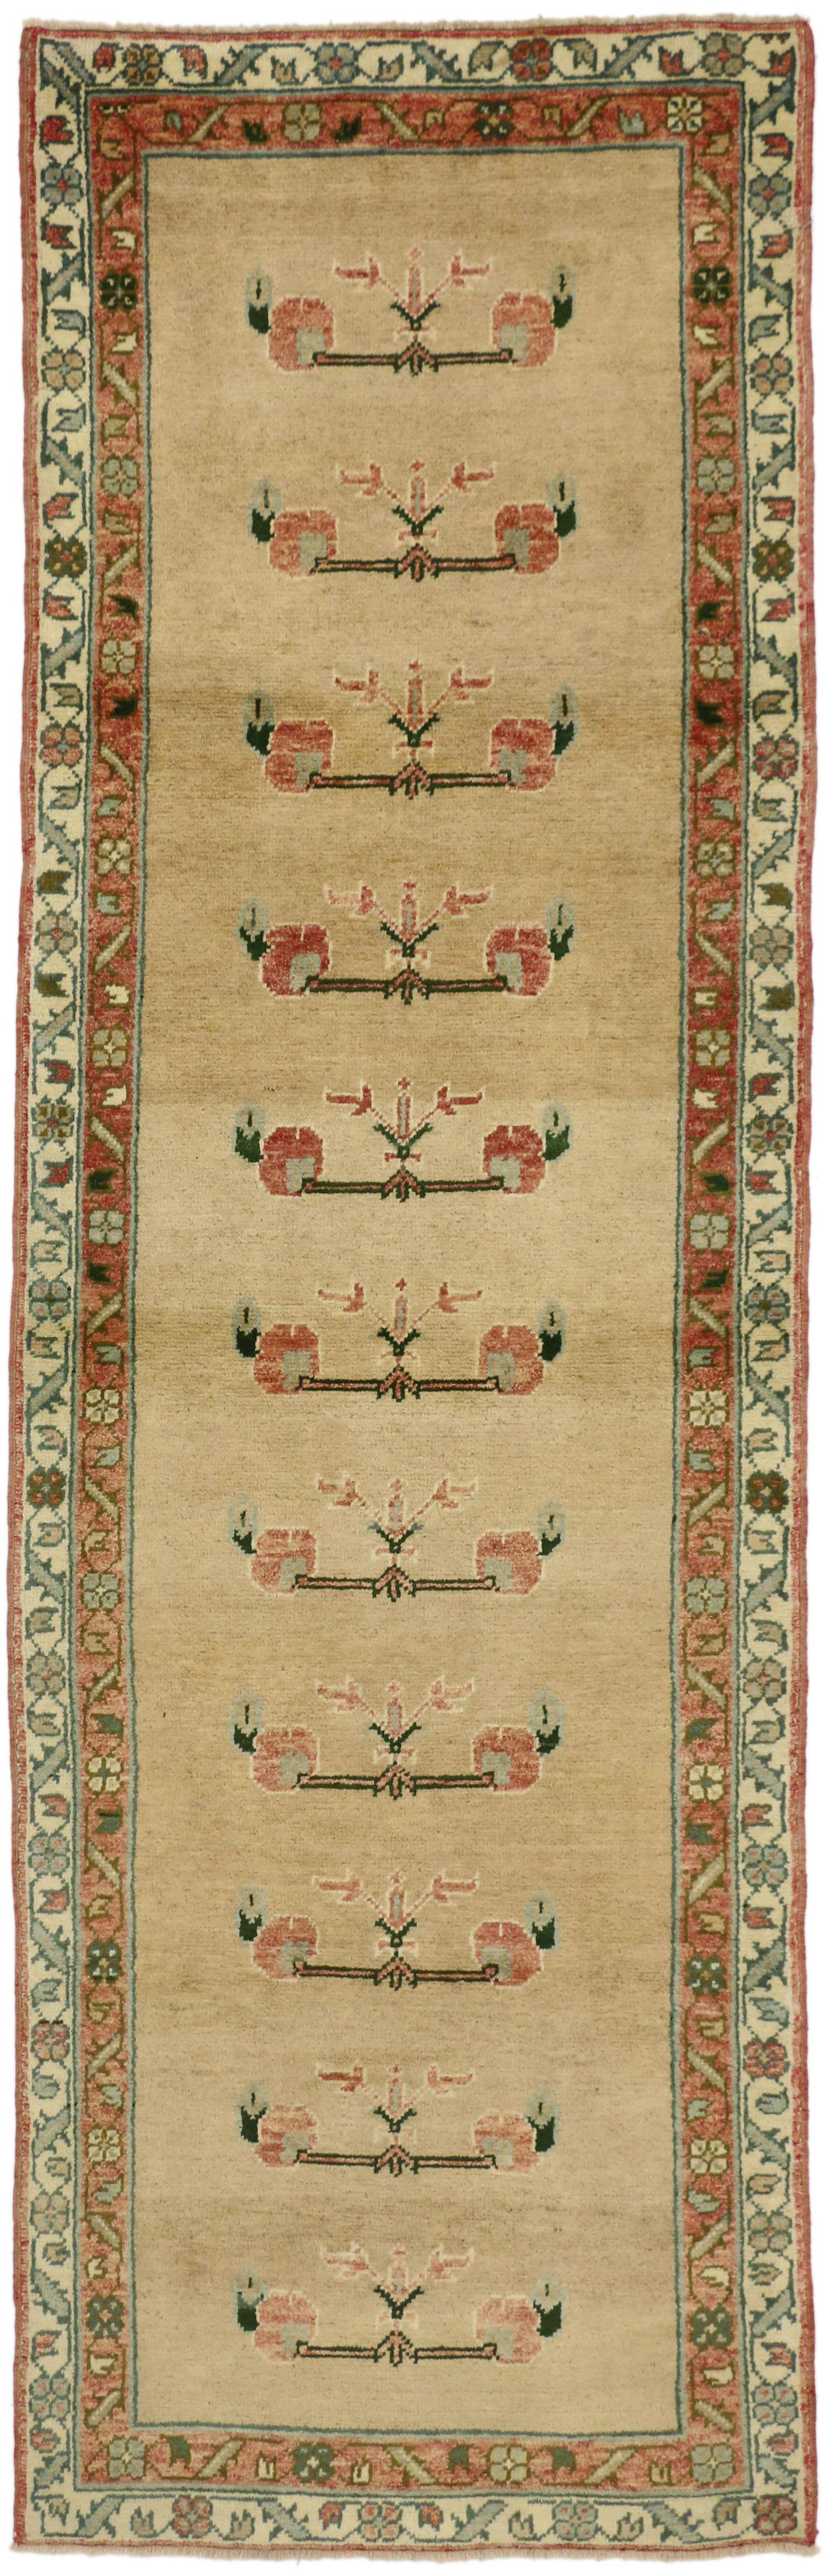 50189 Vintage Turkish Oushak Runner with English Cottage Style, Hallway Carpet Runner 03’00 x 09’07. Warm and inviting, this hand-knotted wool vintage Oushak runner beautifully embodies a traditional style. The abrashed tan field features a